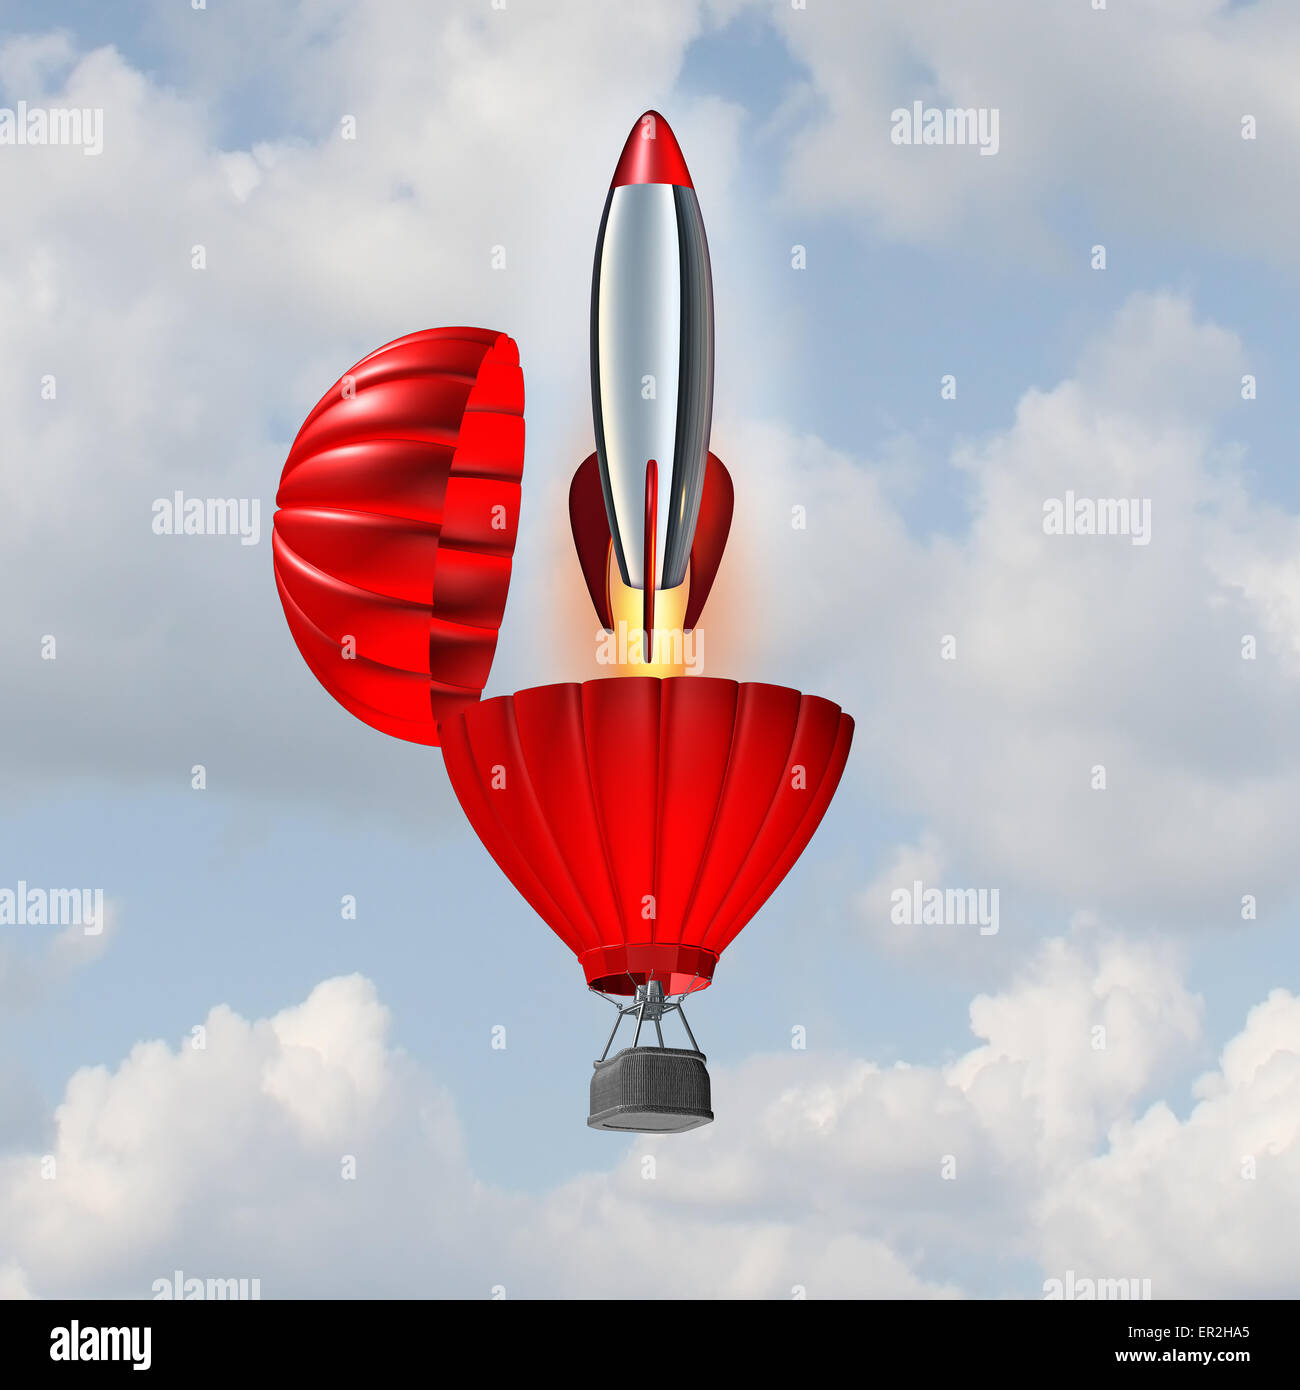 Ambition concept and building momentum symbol of business success as a hot air balloon opening up with an emerging rocket ship b Stock Photo